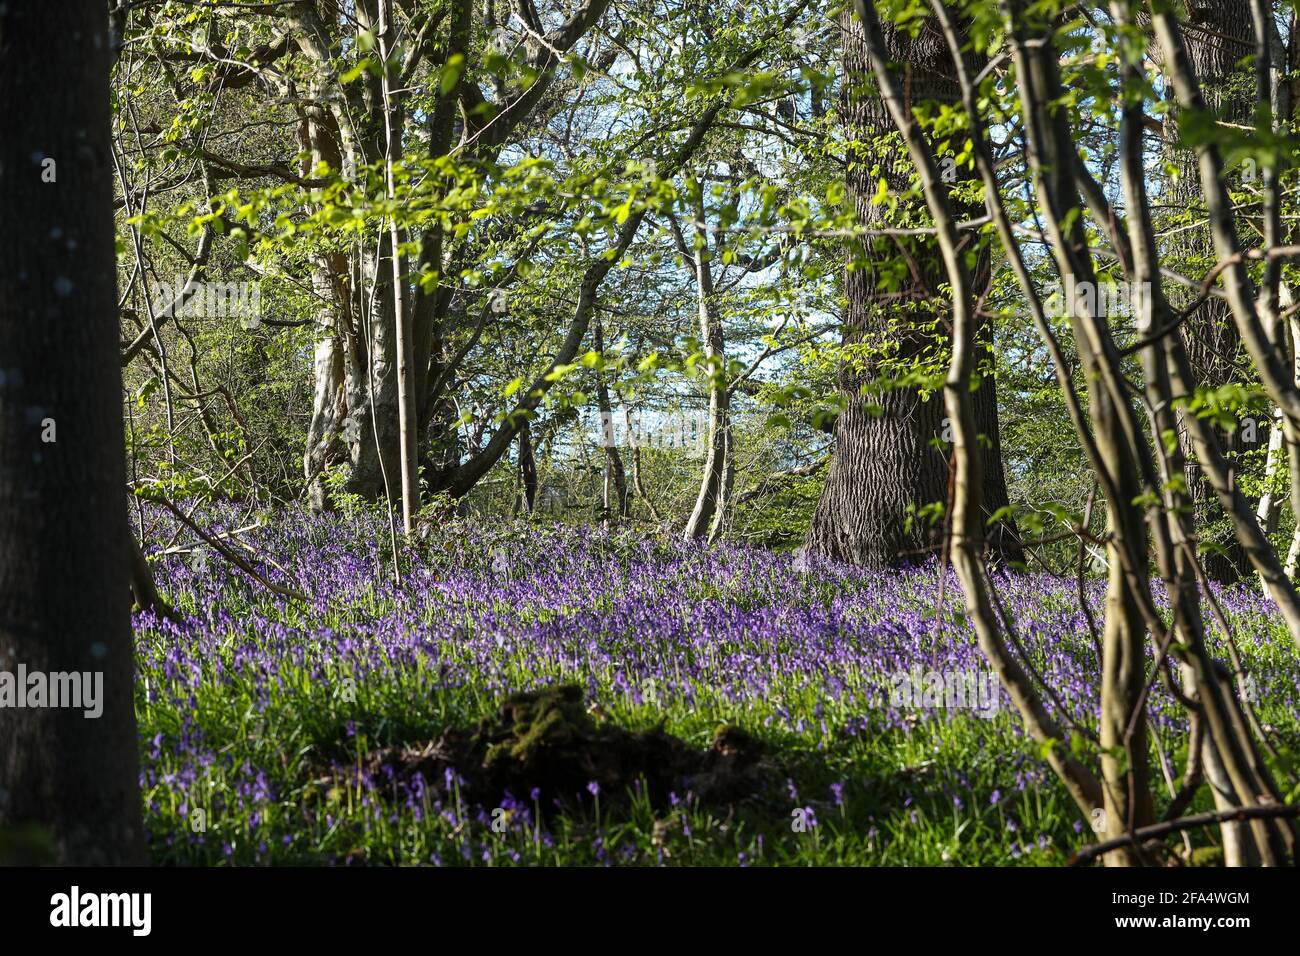 Rolvenden, UK. 23rd April 2021.   The glorious display of native English bluebells in the ancient woodland setting of Brick Kiln Wood at Hole Park Gardens in Rolvenden, Kent.  The cold weather and frosty mornings has been holding back this spectacular natural show but the bluebells are now winning through as the days draw longer and are rapidly approaching their very best.   Credit: Richard Crease/Alamy Live News Stock Photo